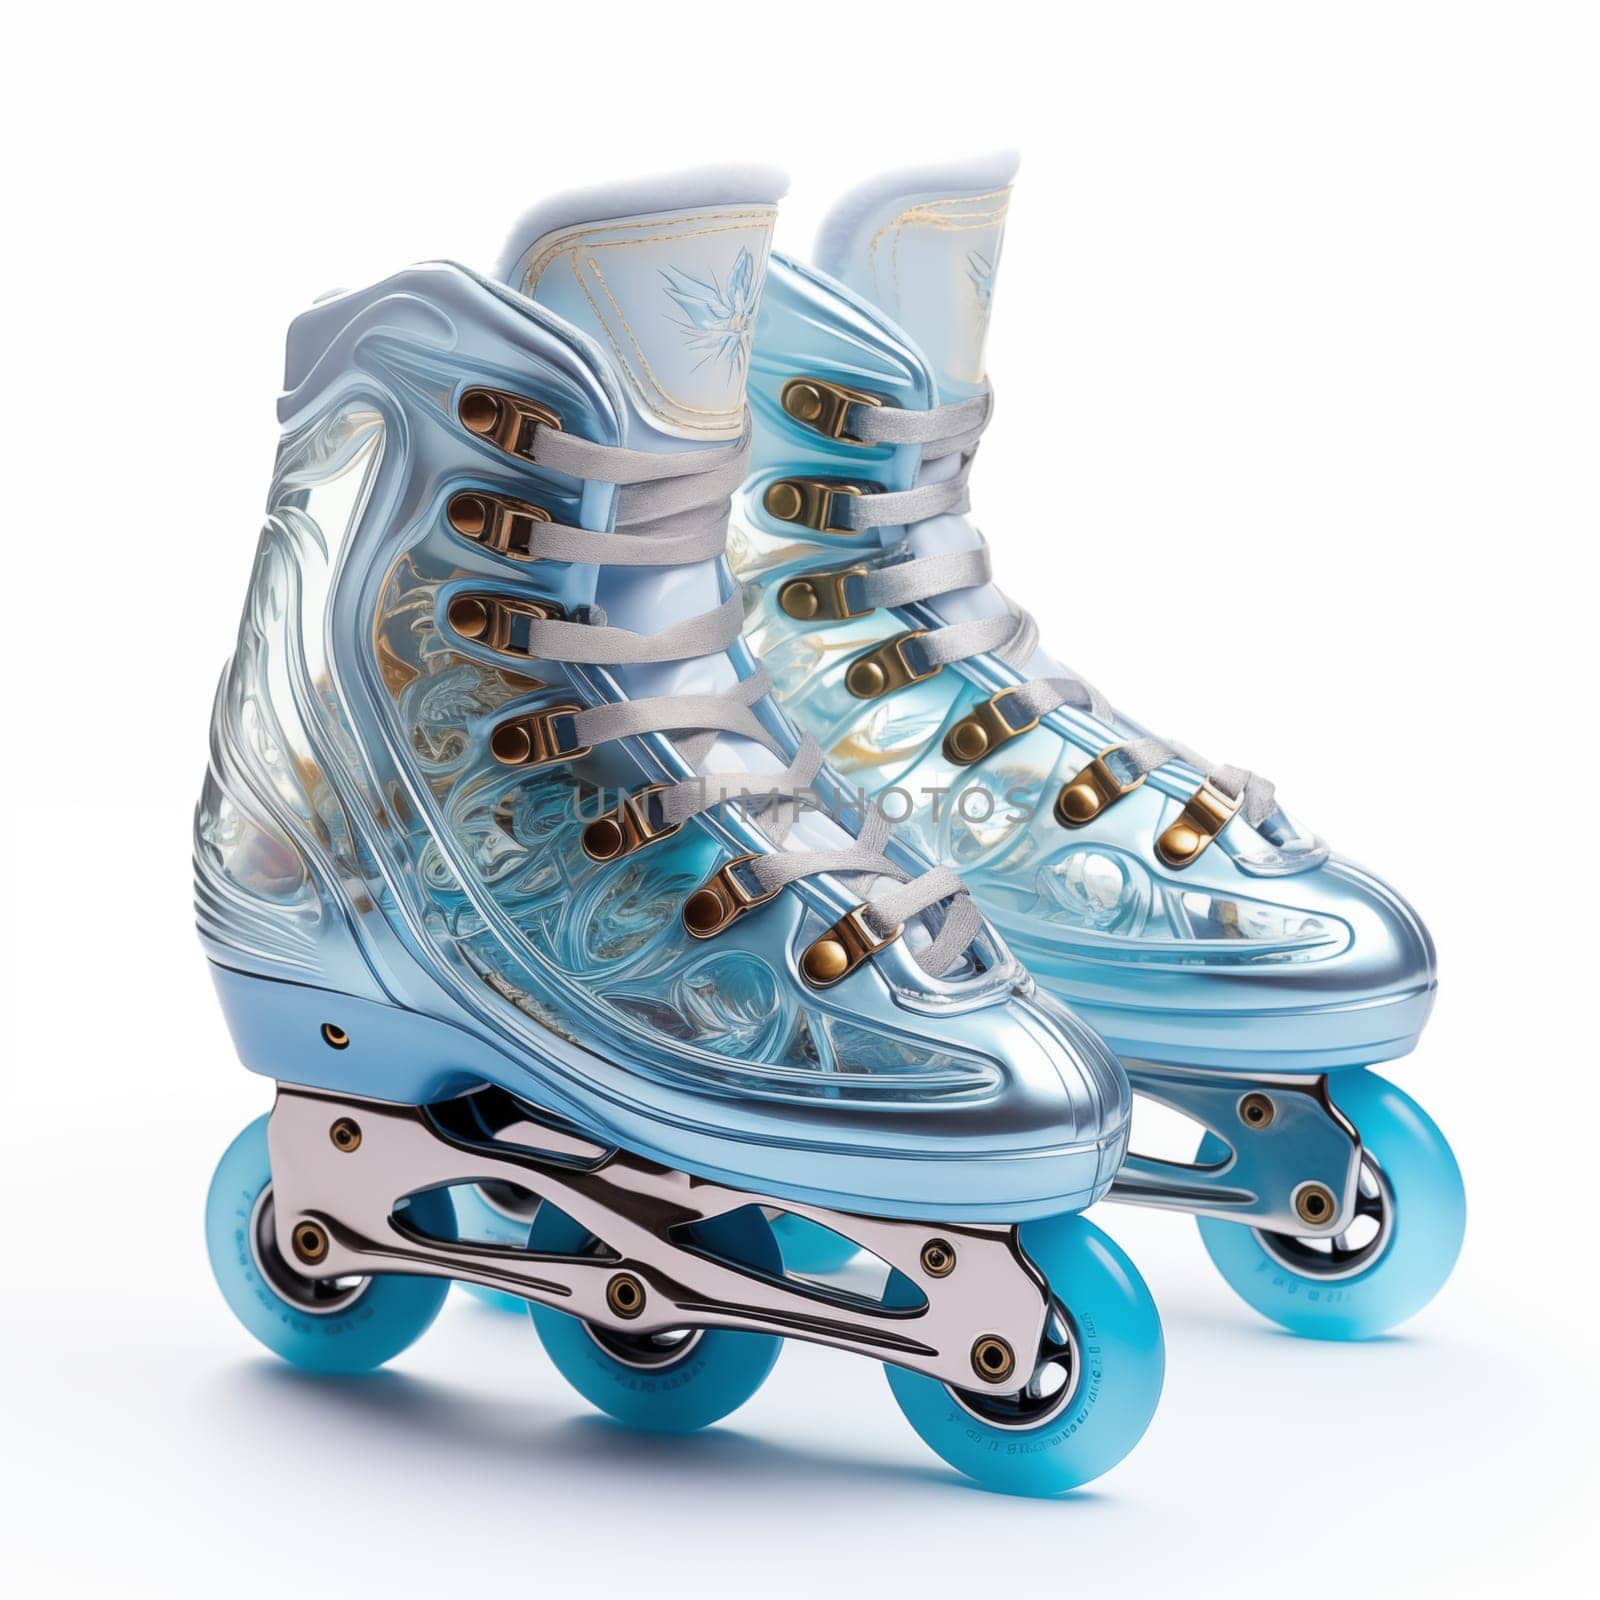 Luxury blue roller skates standing isolated on a white background.